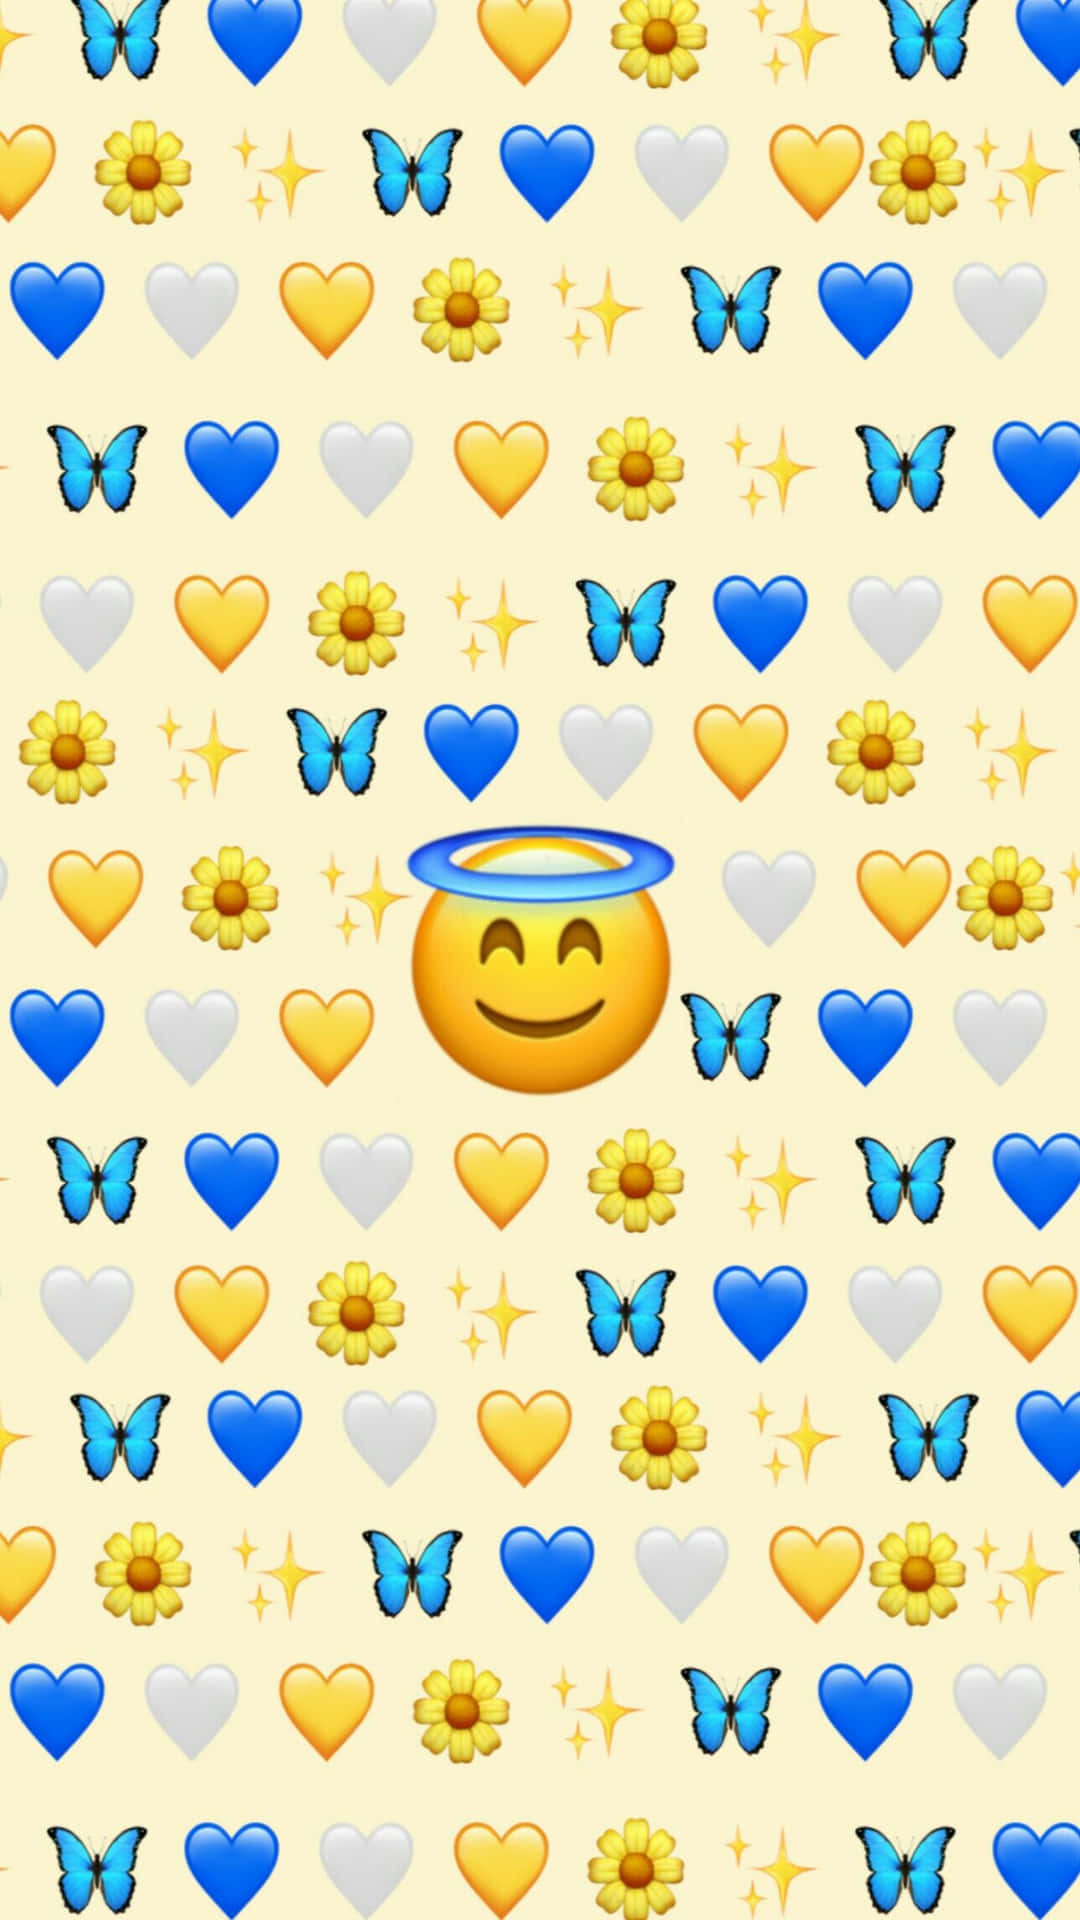 Download Show your emotions with this cute emoji Wallpaper ...